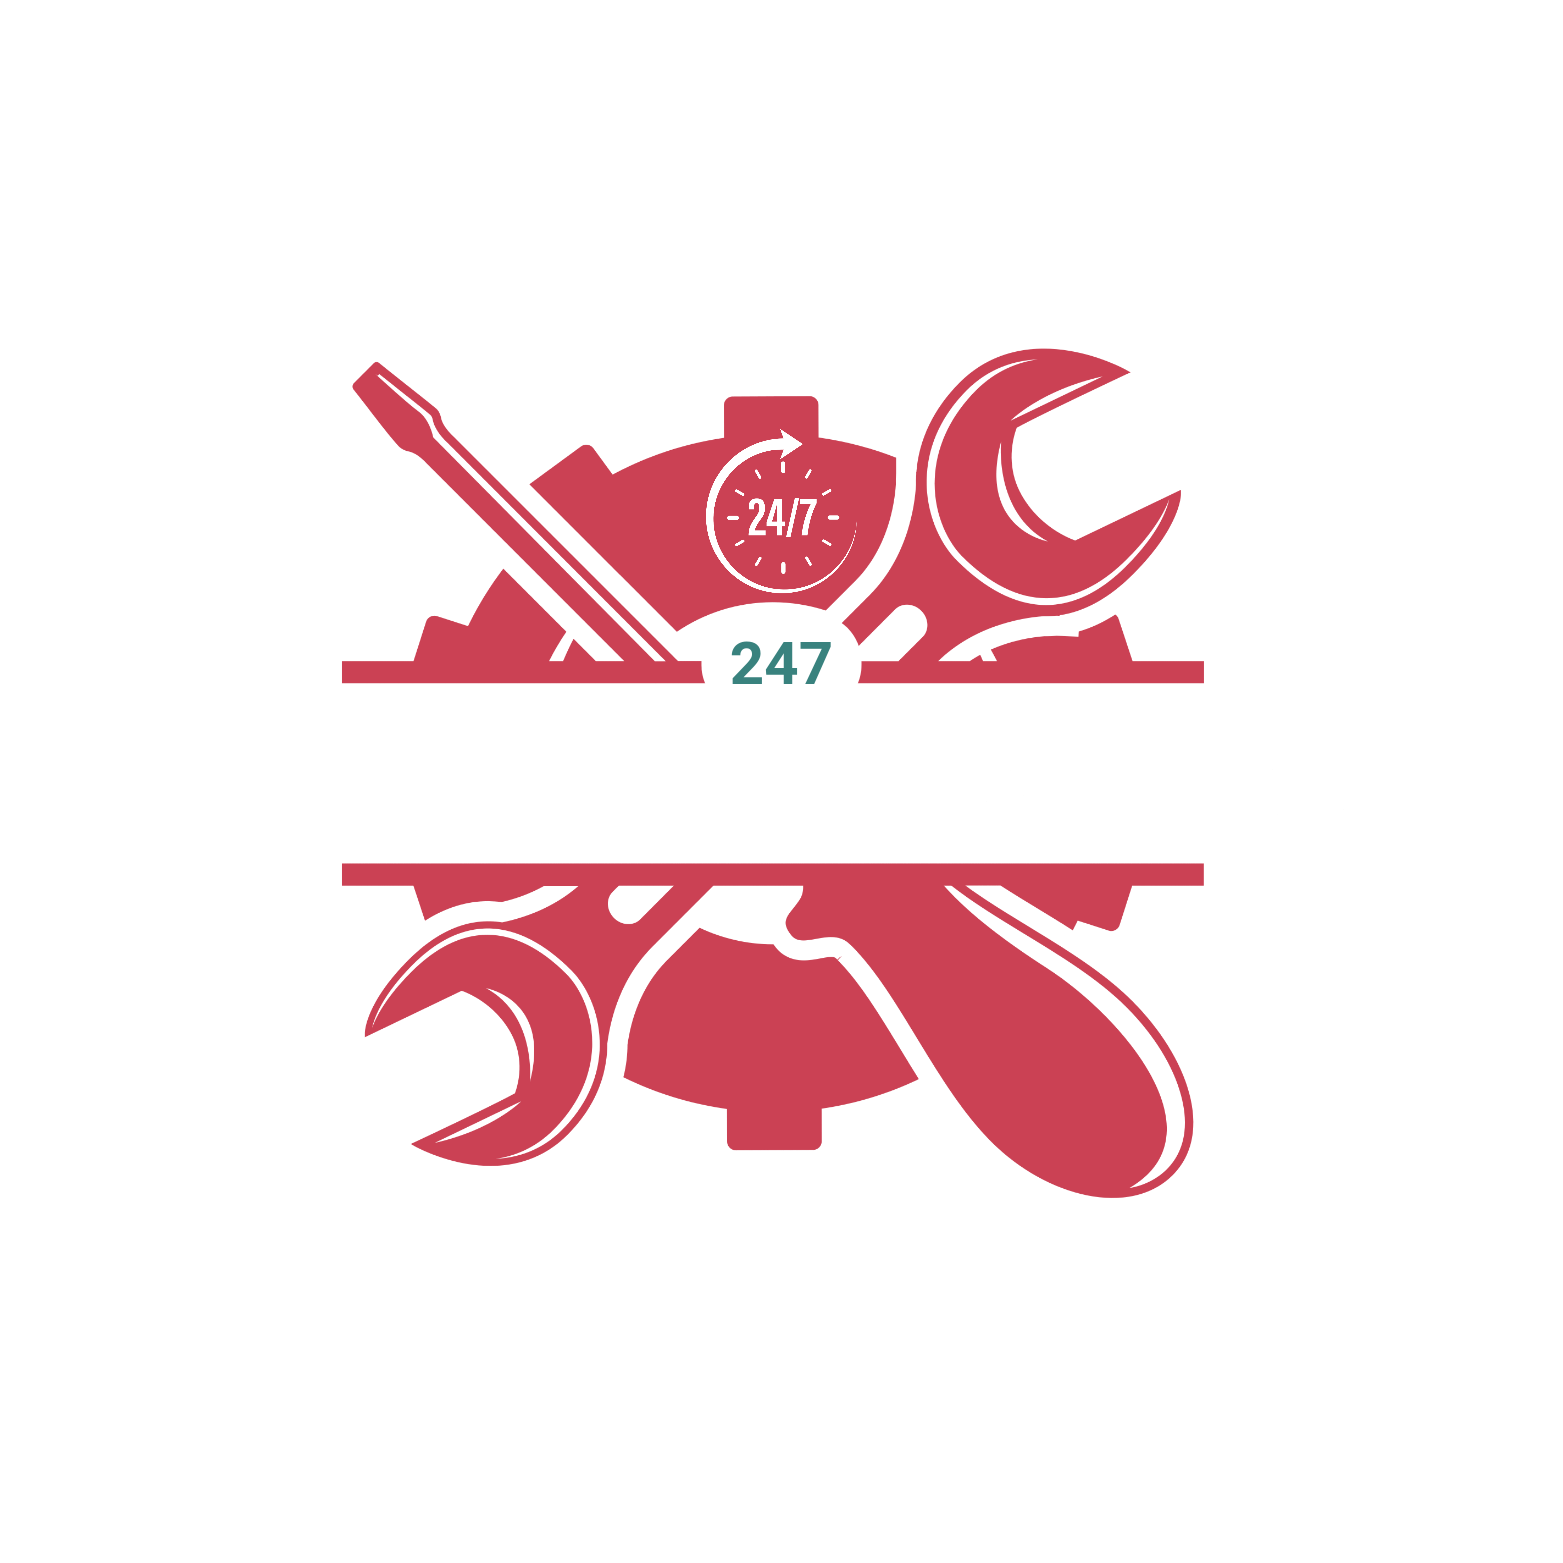 Logo of Electrical Solutions 247 Ltd Electrical Appliance Repairs In Londonderry, London